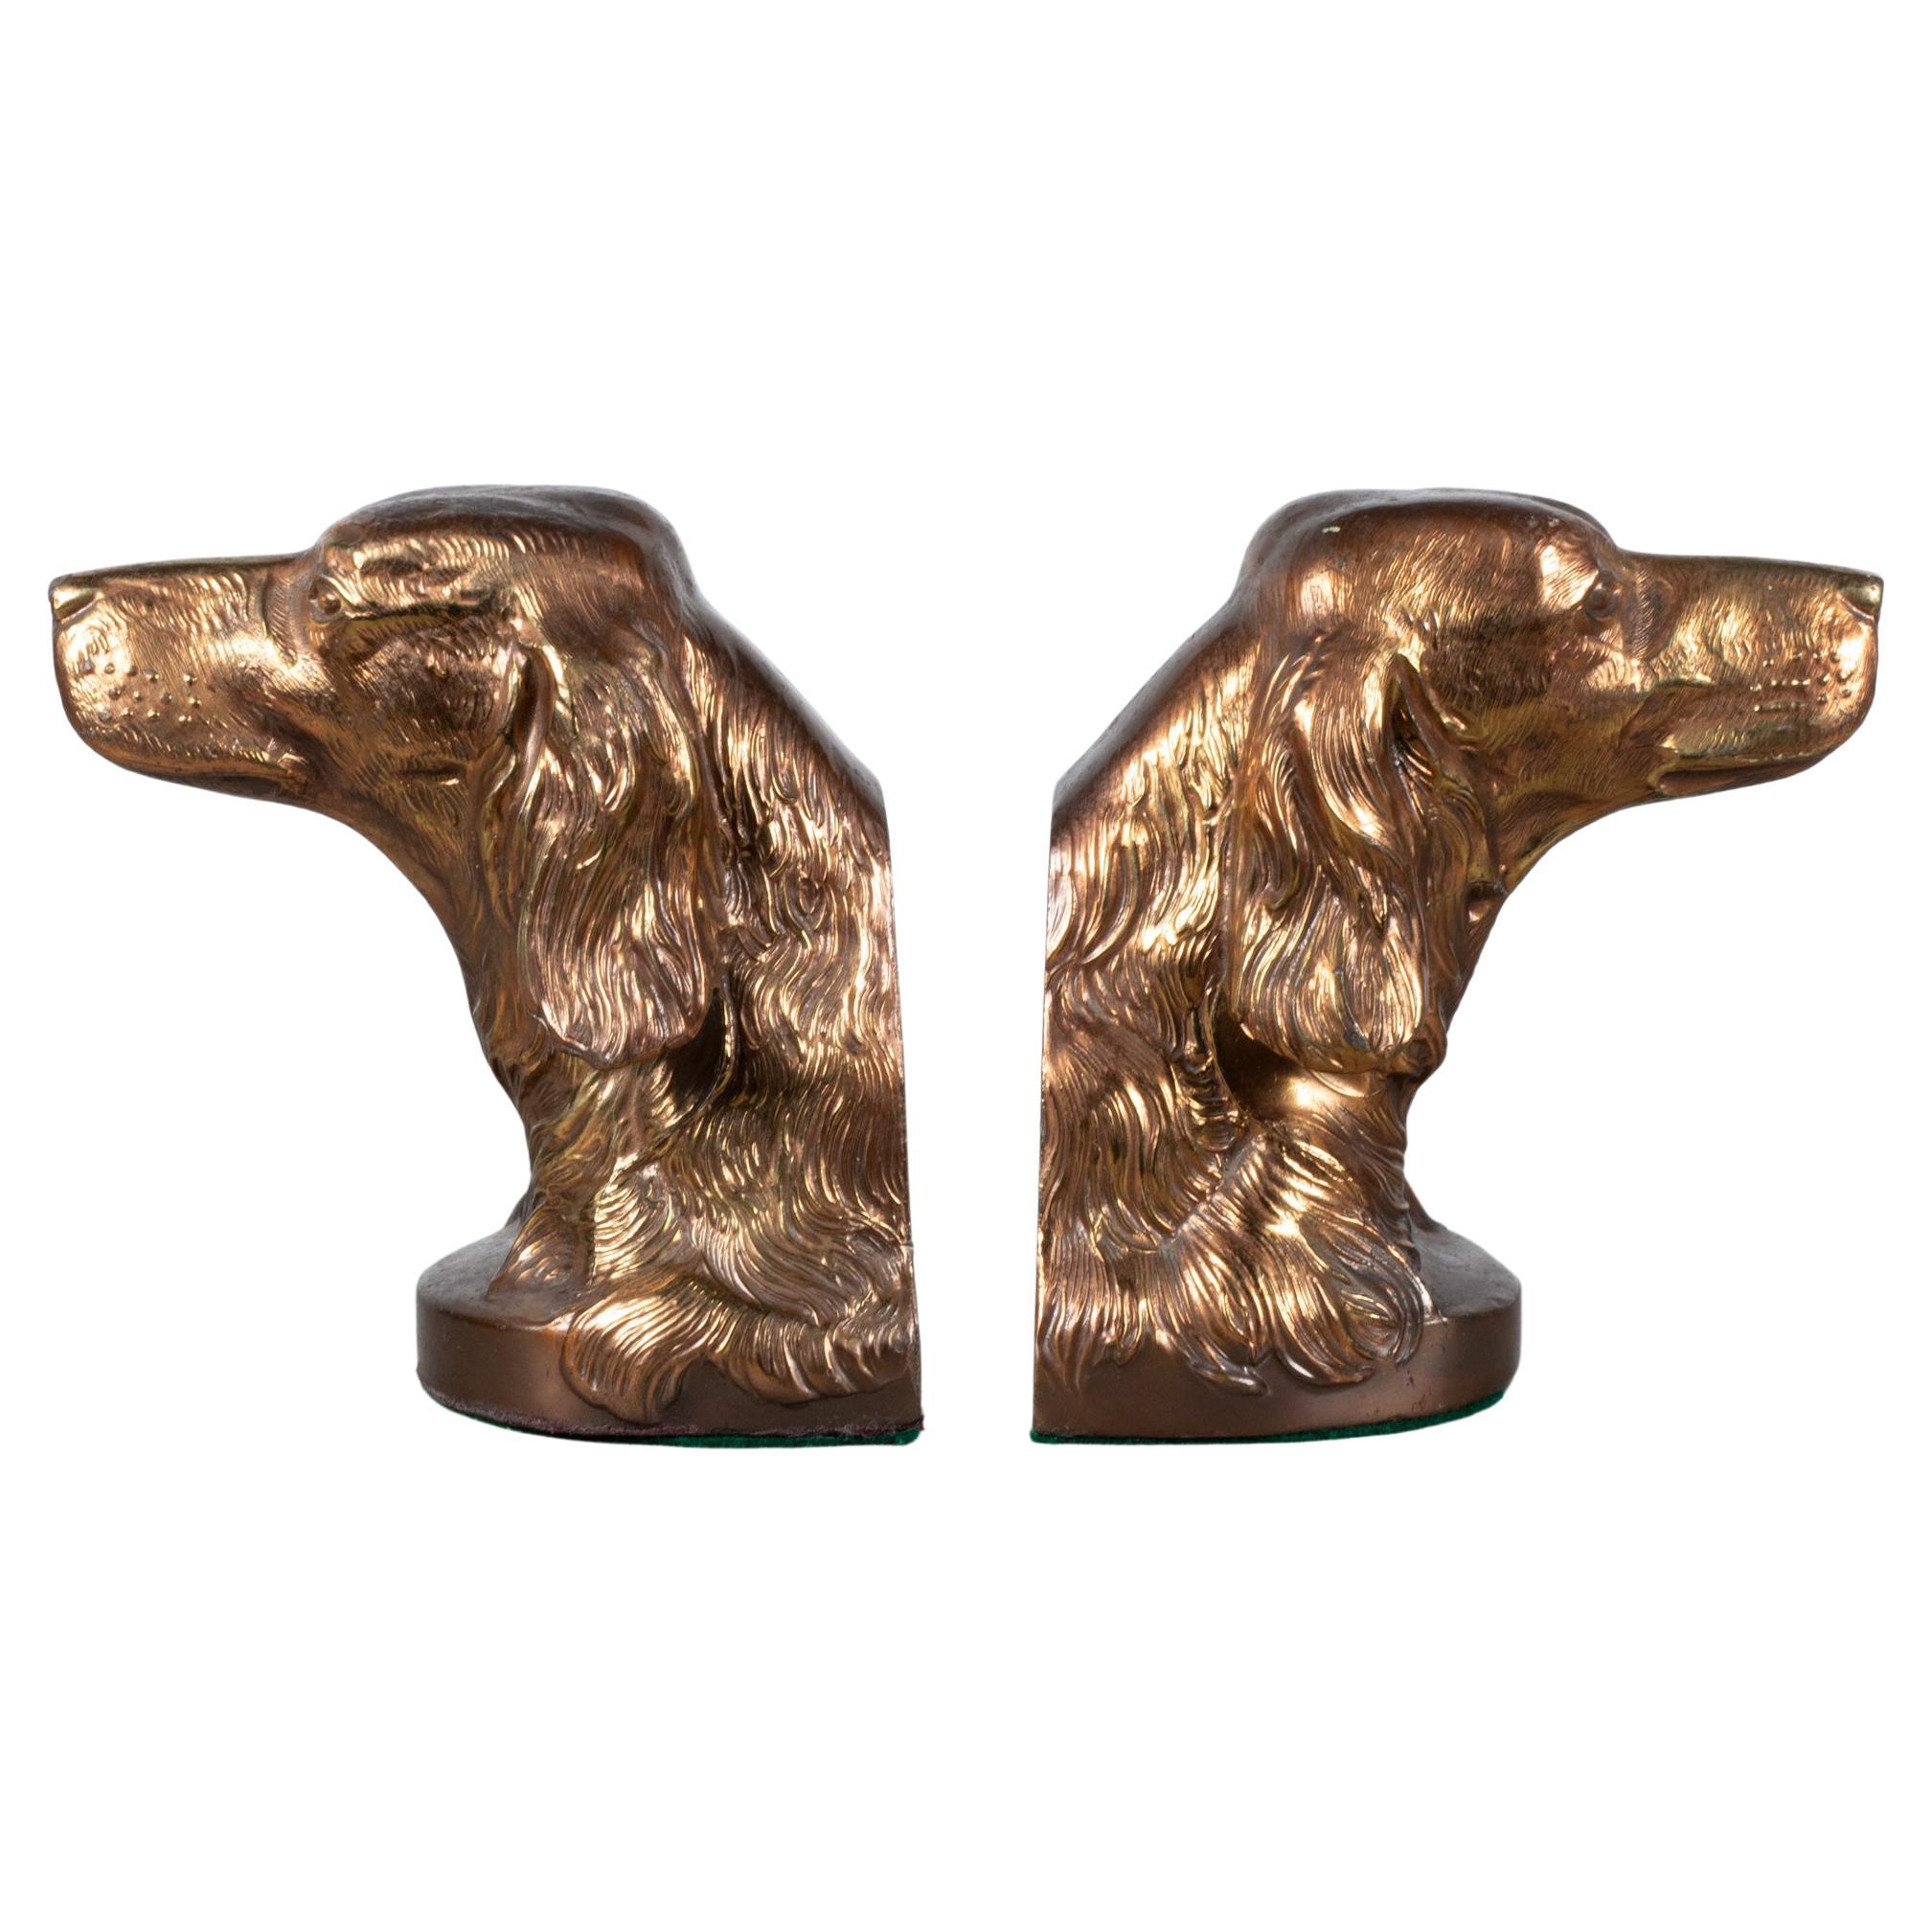 Bronze-Plated Dog Bookends, circa 1940  (FREE SHIPPING) For Sale